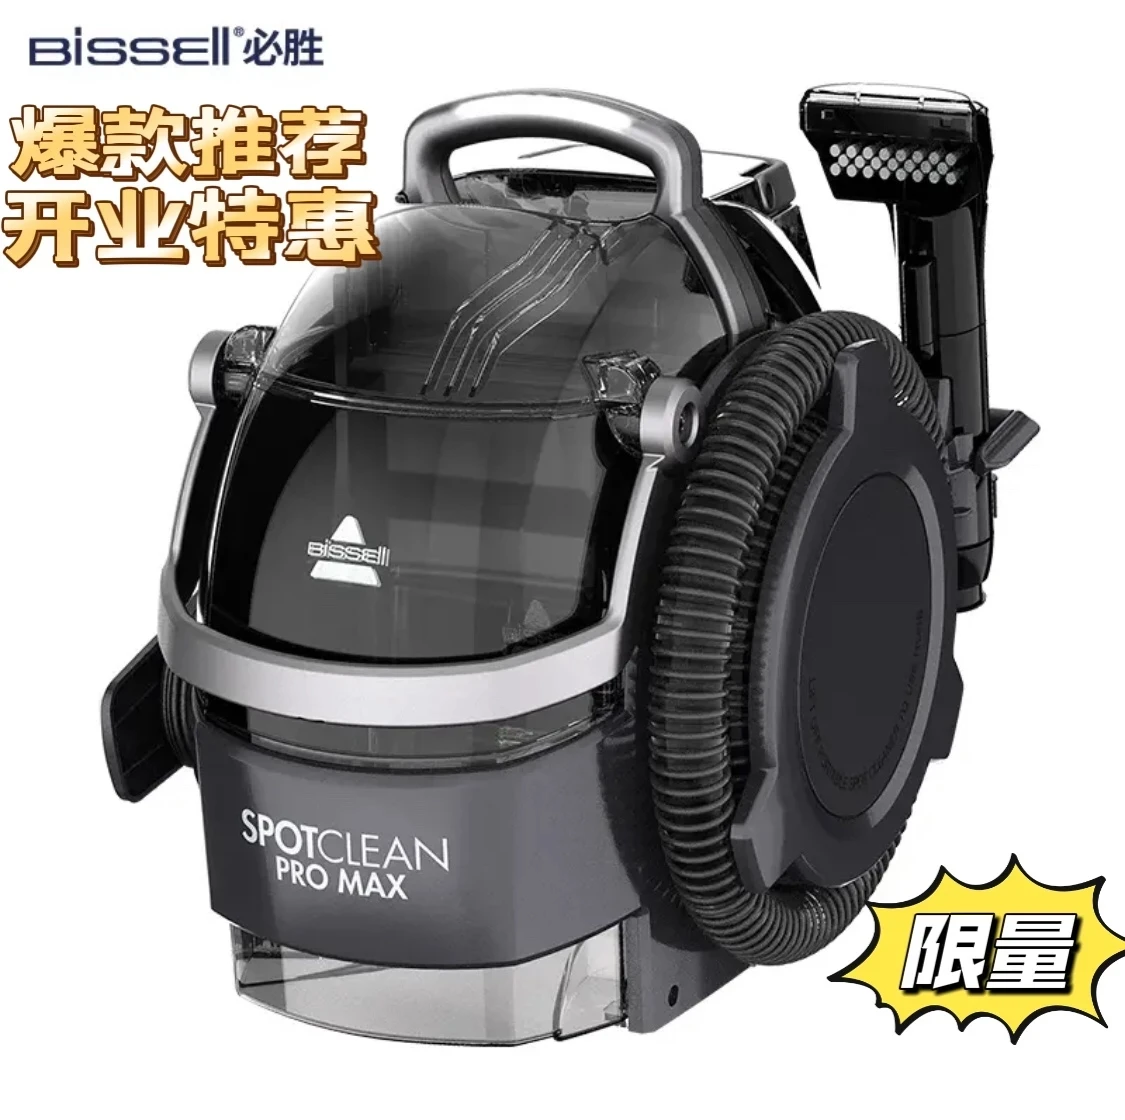 New BISSELL SPOTCLEAN PRO fabric cleaning sofa cleaning machine spray  suction integrated electric multifunctional carpet cleaner - AliExpress